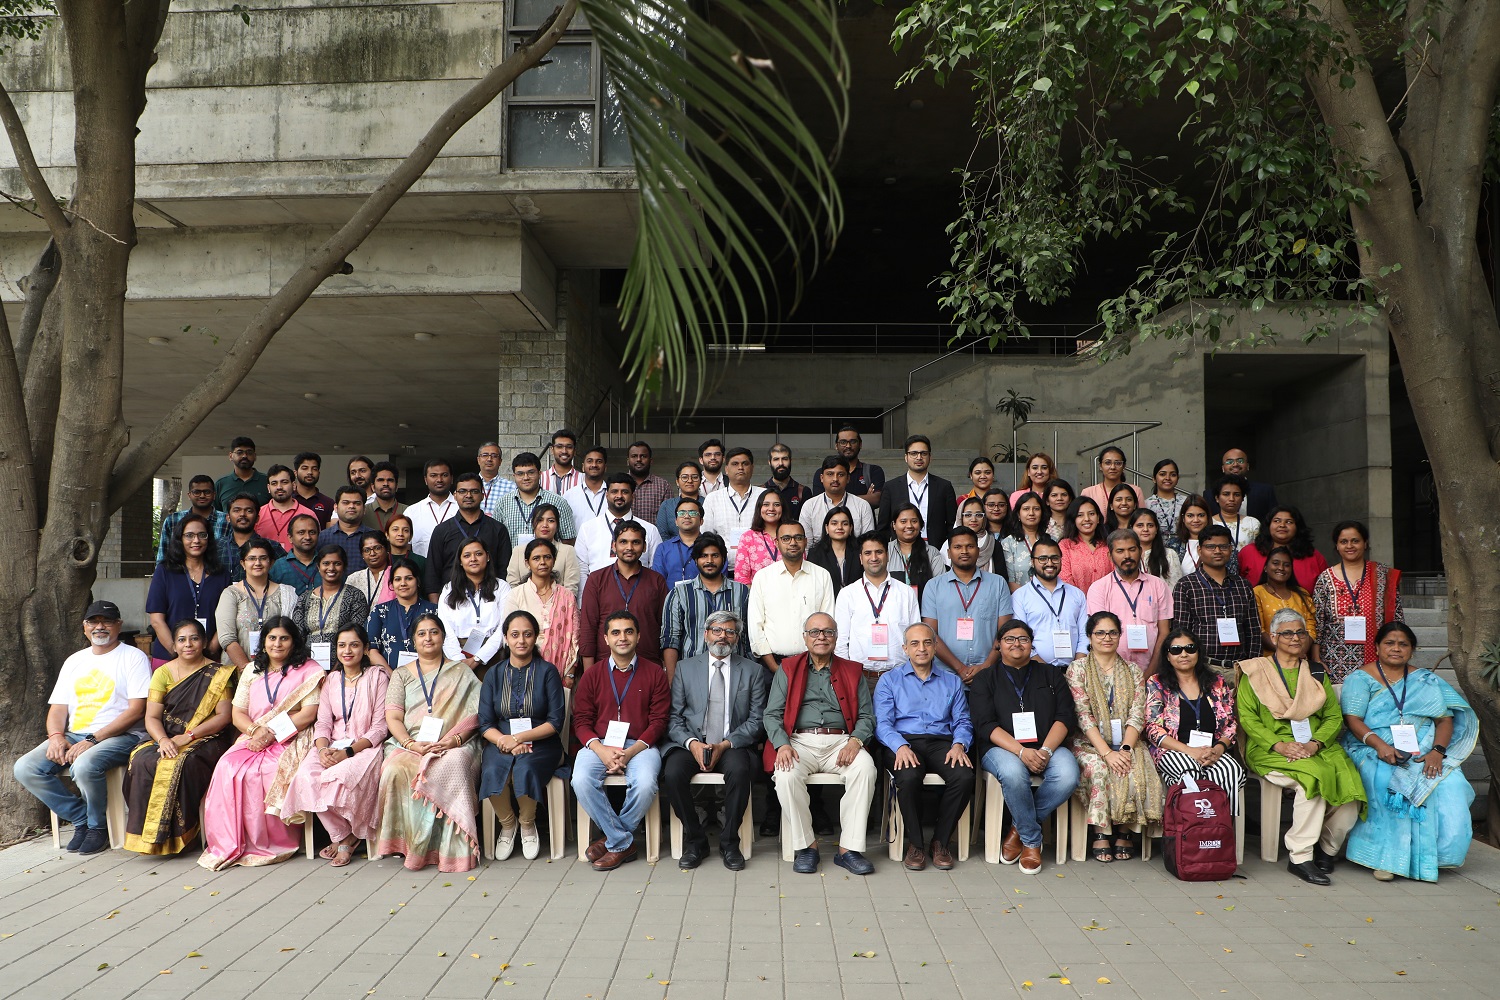 A snapshot of the delegates and participants at the IMR Doctoral Conference (IMRDC).